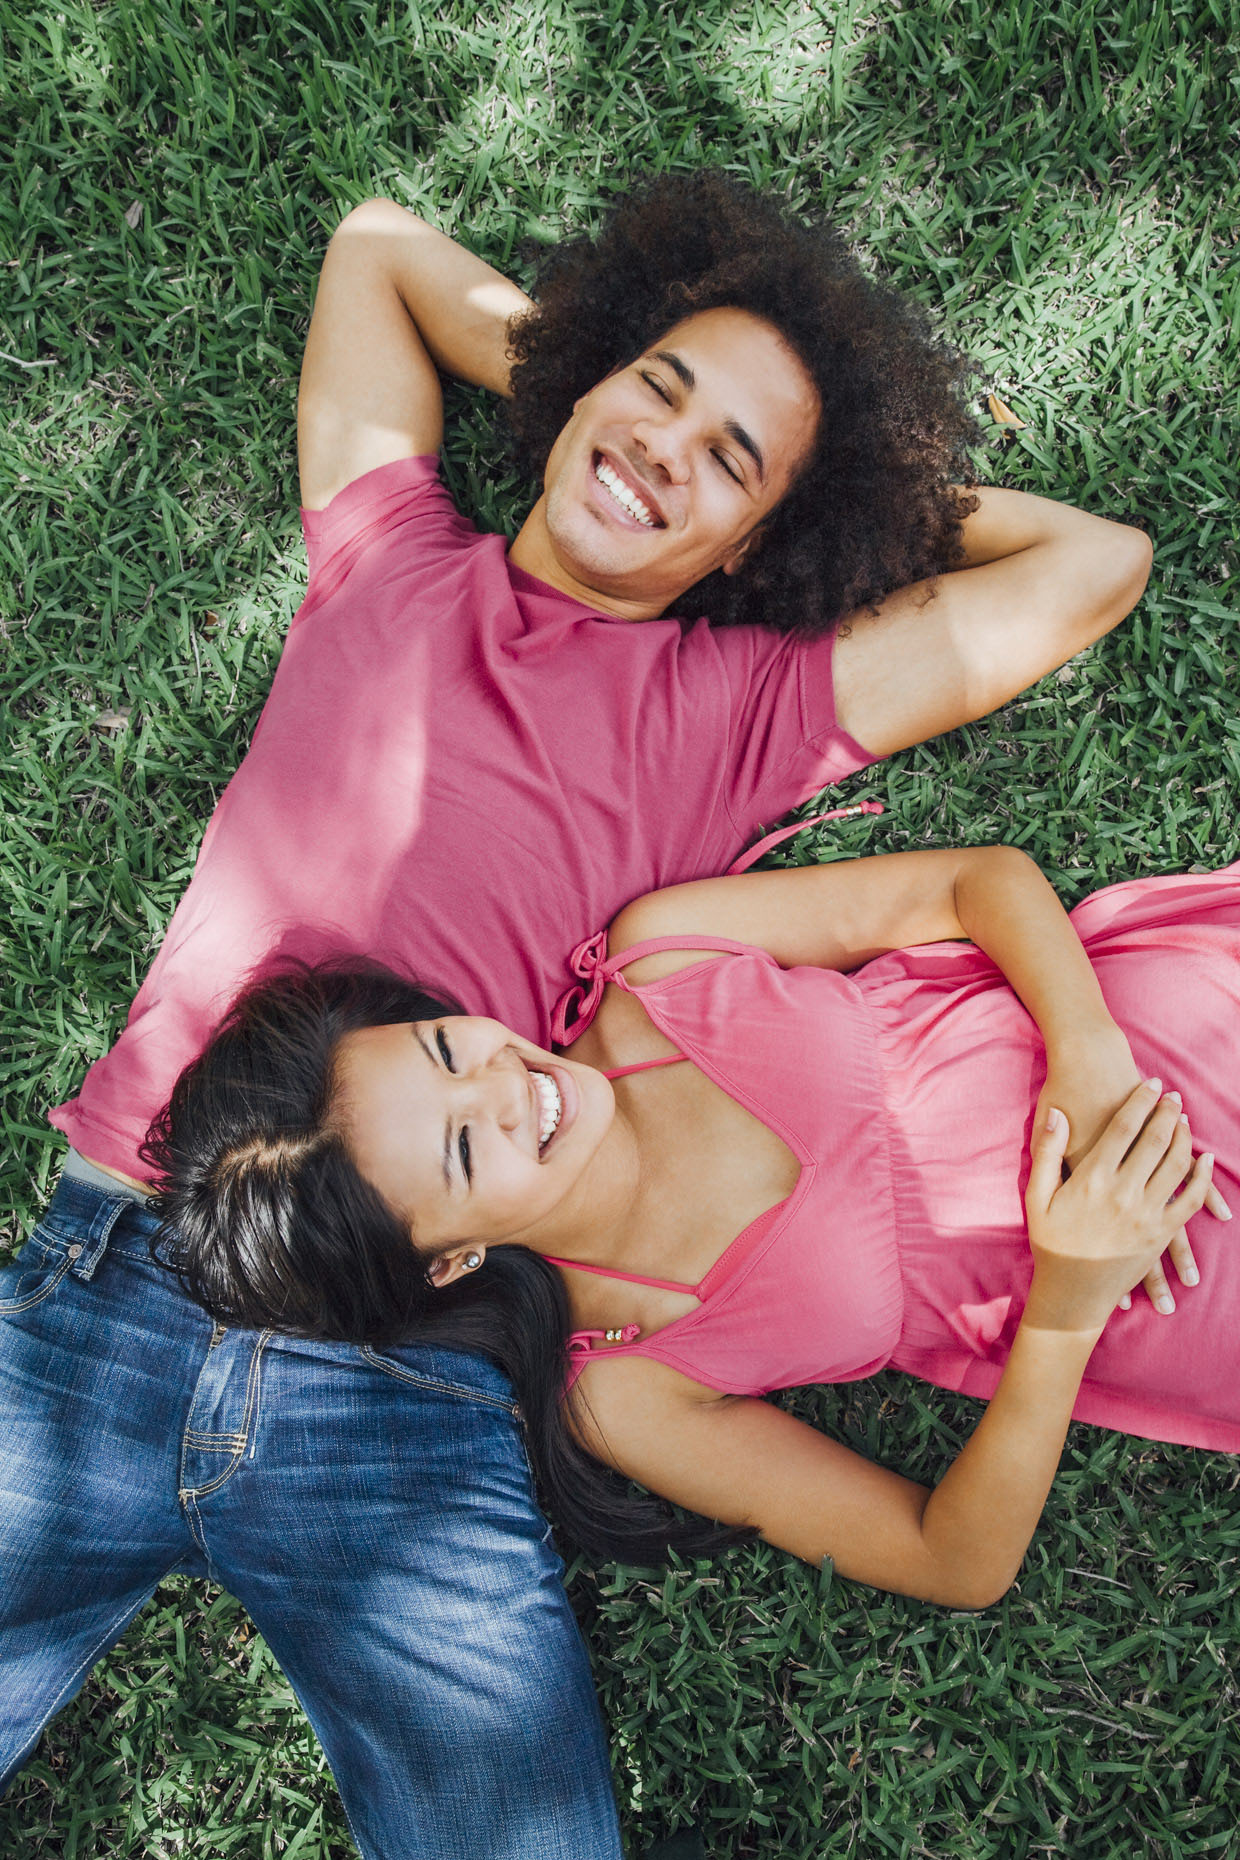 Teen boy and girl laying on grass laughing